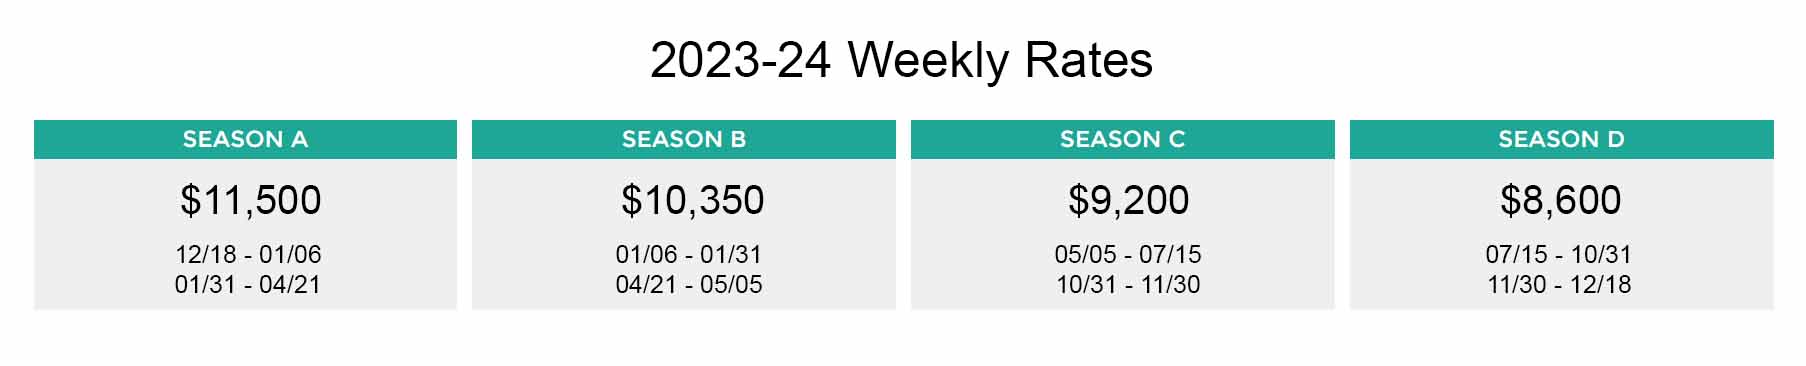 Weekly Rates - 2023-24